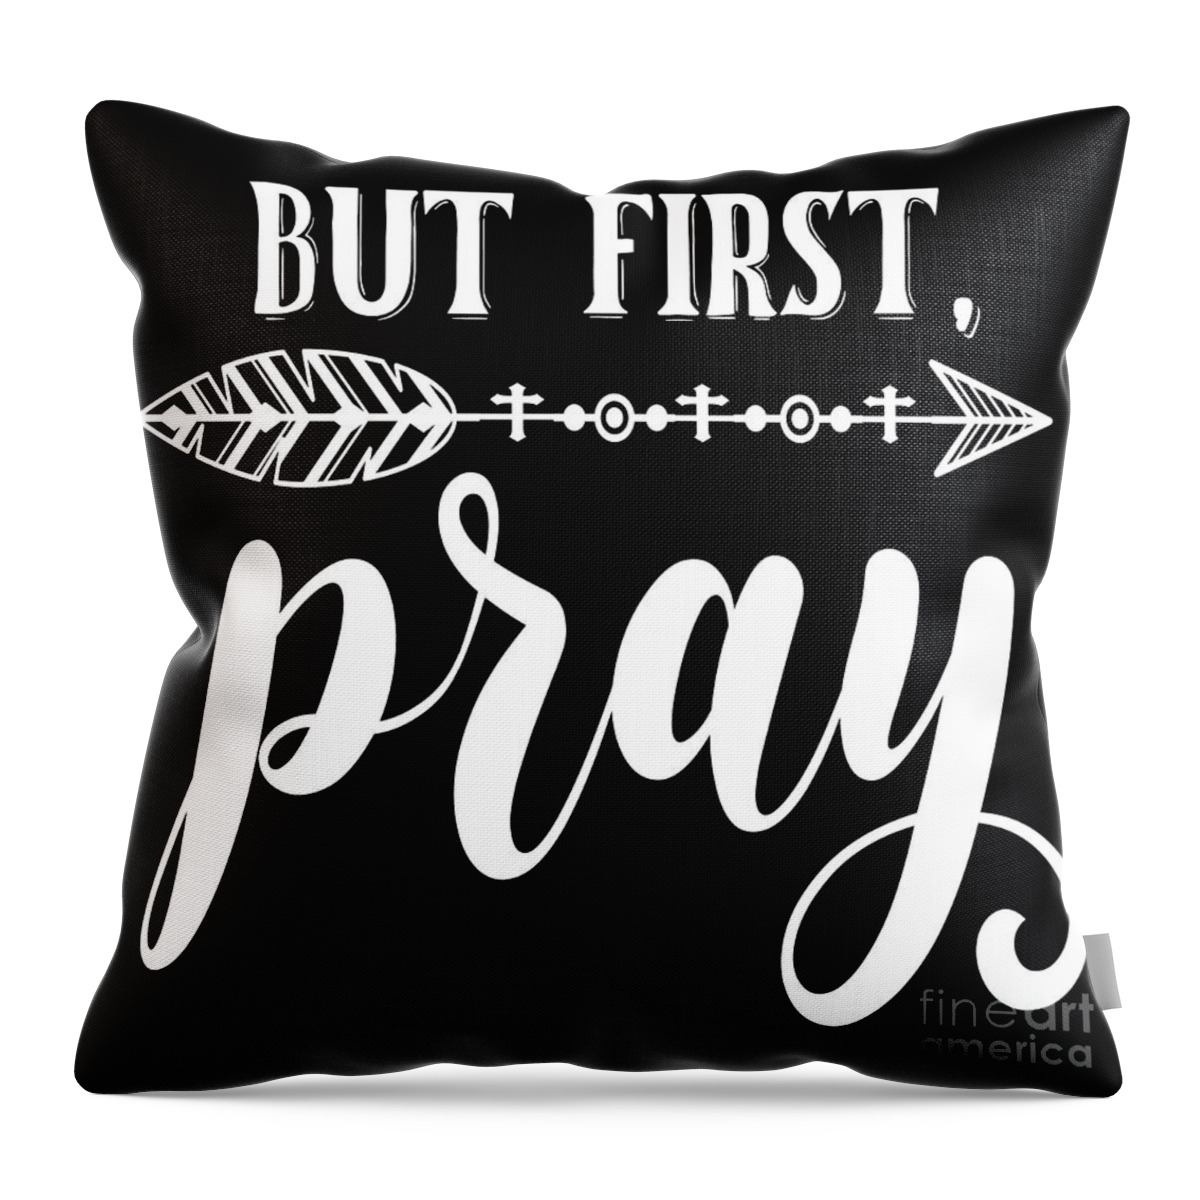 Christian Throw Pillow featuring the digital art Christian Typography A2 by Jean Plout